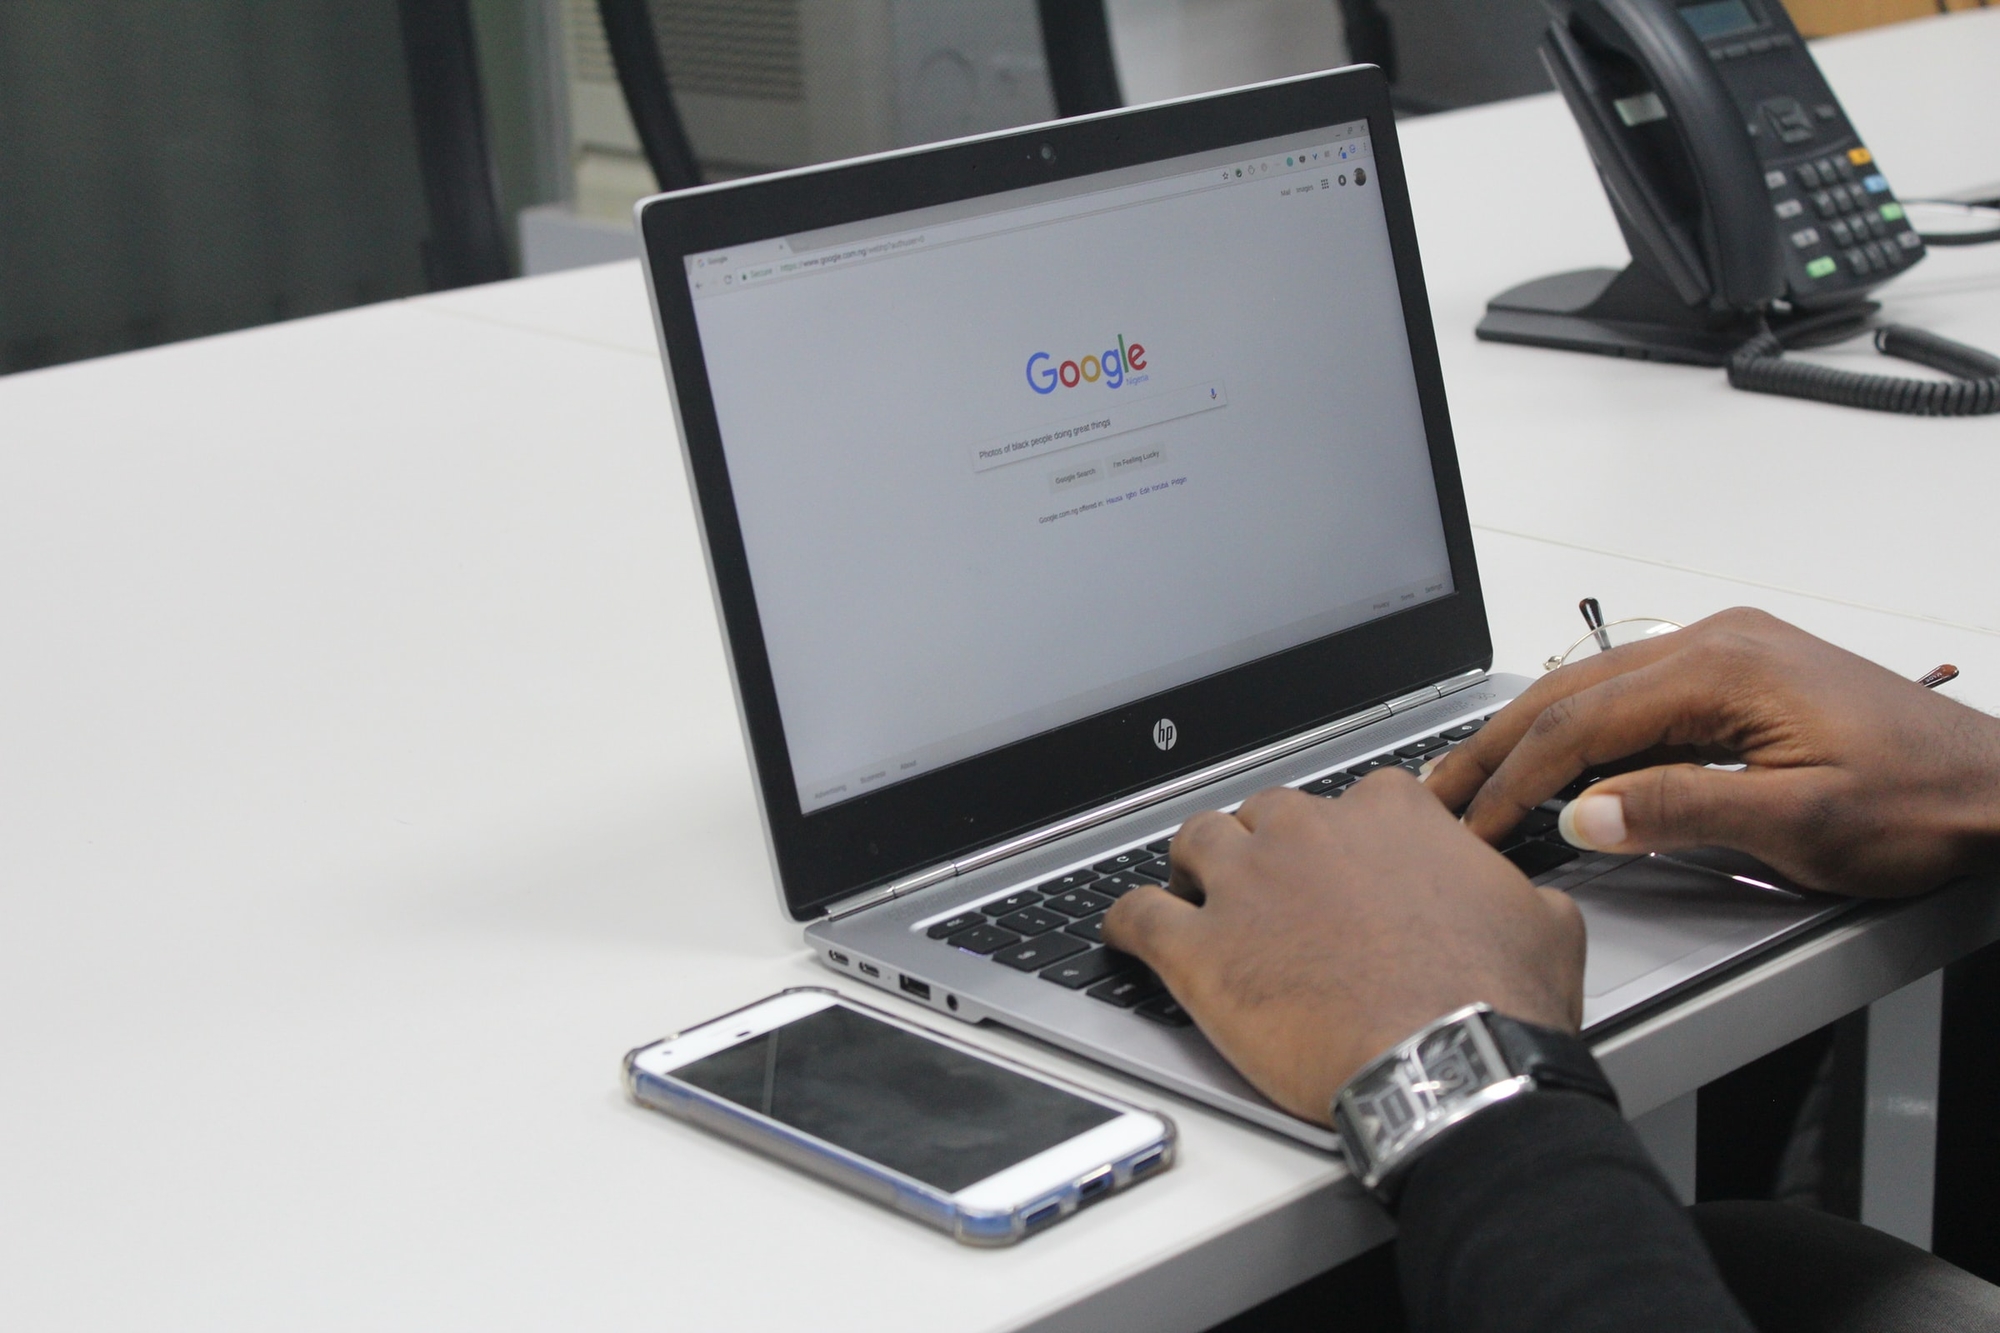 a person using the Google search engine on a laptop